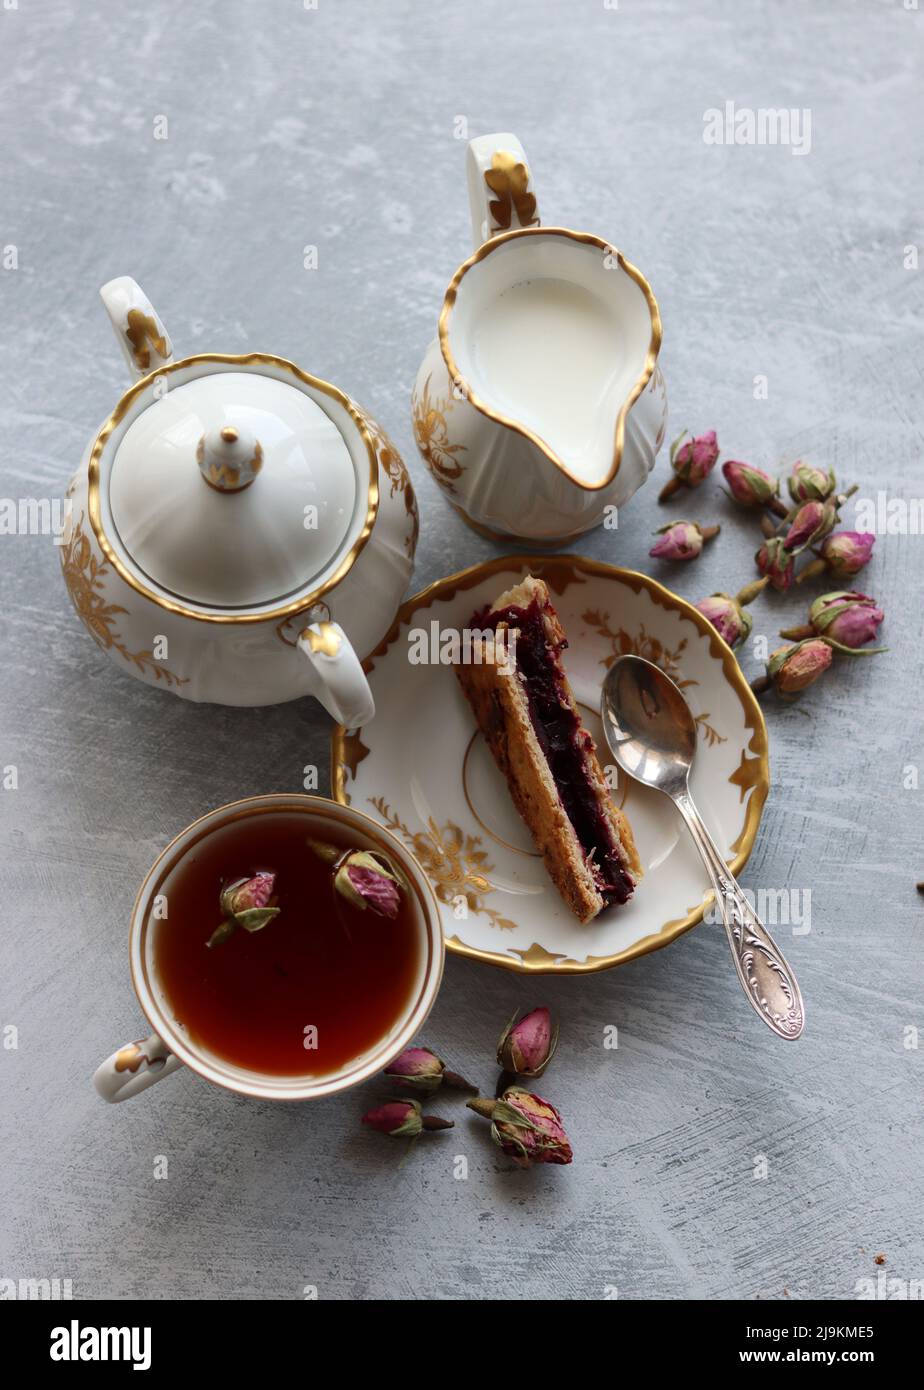 Still life with cup of tea,  jug of milk, cherry pie, small rose flowers. White vintage tableware on a table.  Sweet breakfast close up photo. Stock Photo